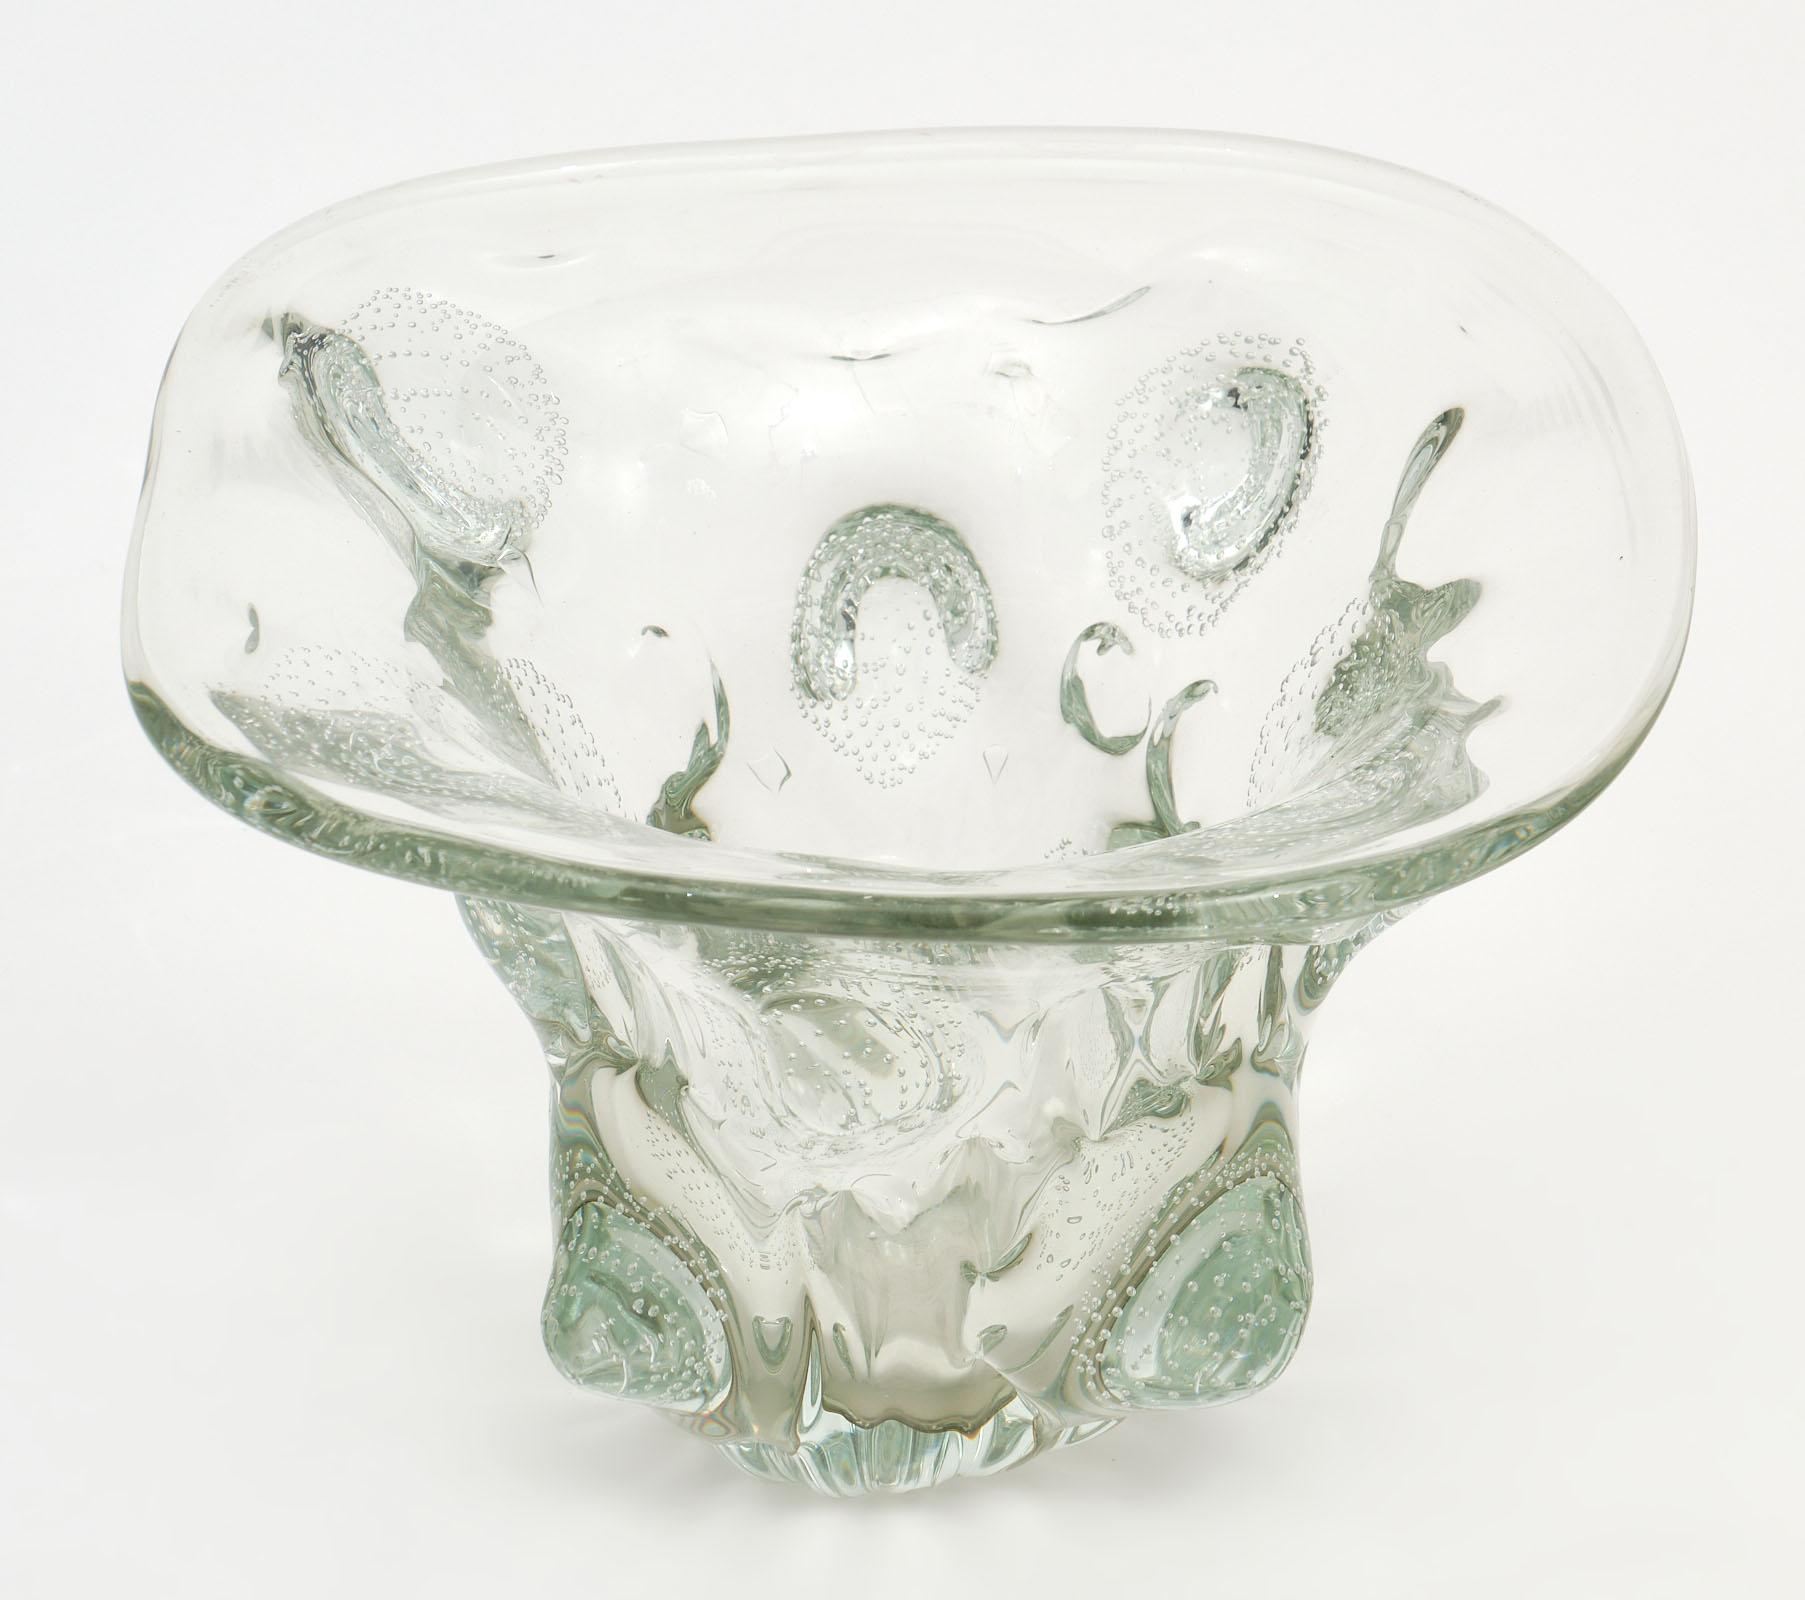 Vintage Barovier “A Bolle” Murano glass vase in a clear glass tone. We love the organic shapes of this piece and the hand blown detail. It is a stunning piece of art and features the bubbles within the glass that give it its name.